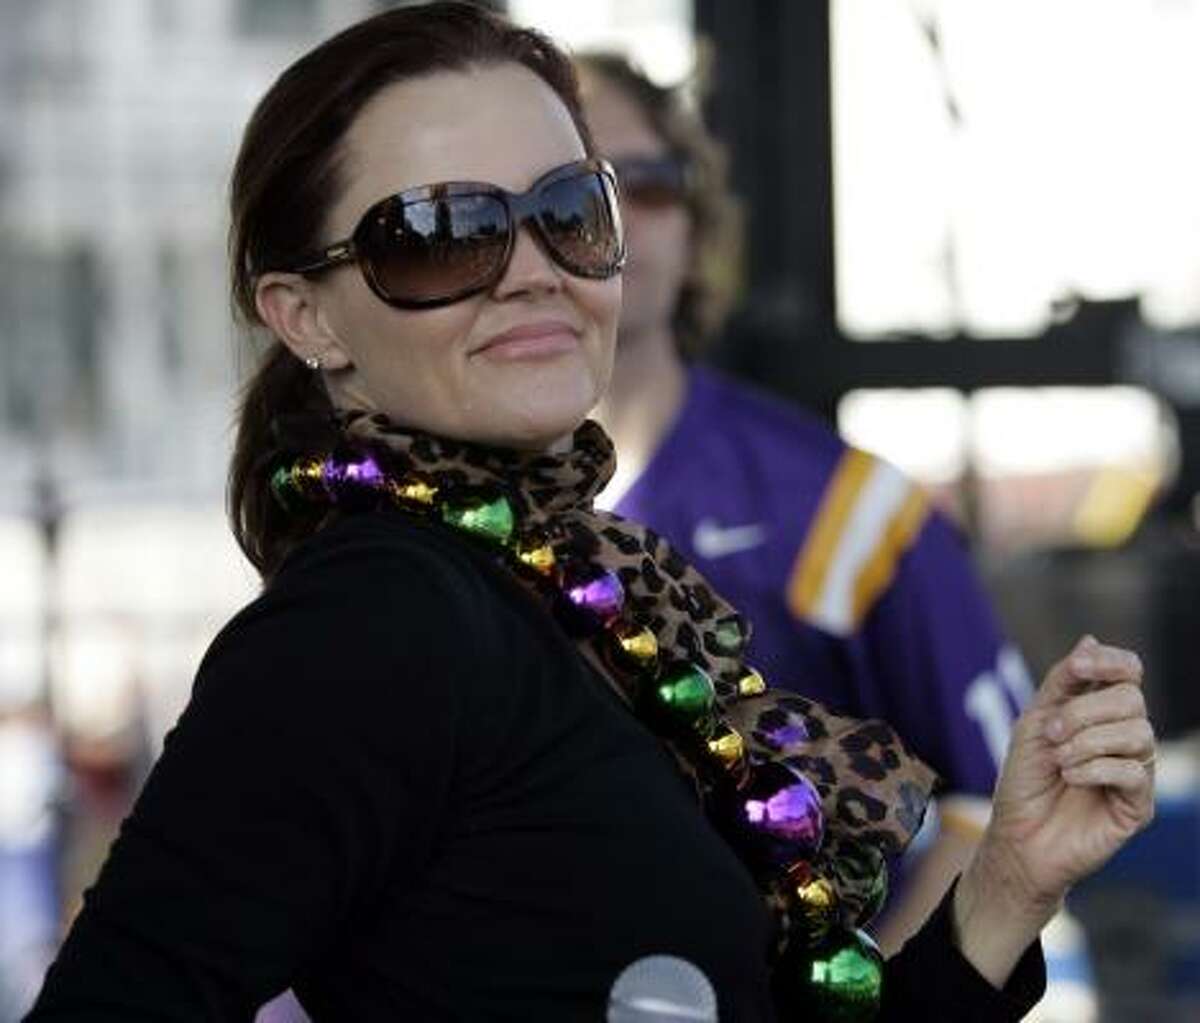 NutriSystem announced Belinda Carlisle is the newest member of the brand’s celebrity roster list. Carlisle plans to shed 20 pounds before her 50th birthday, according to the company.